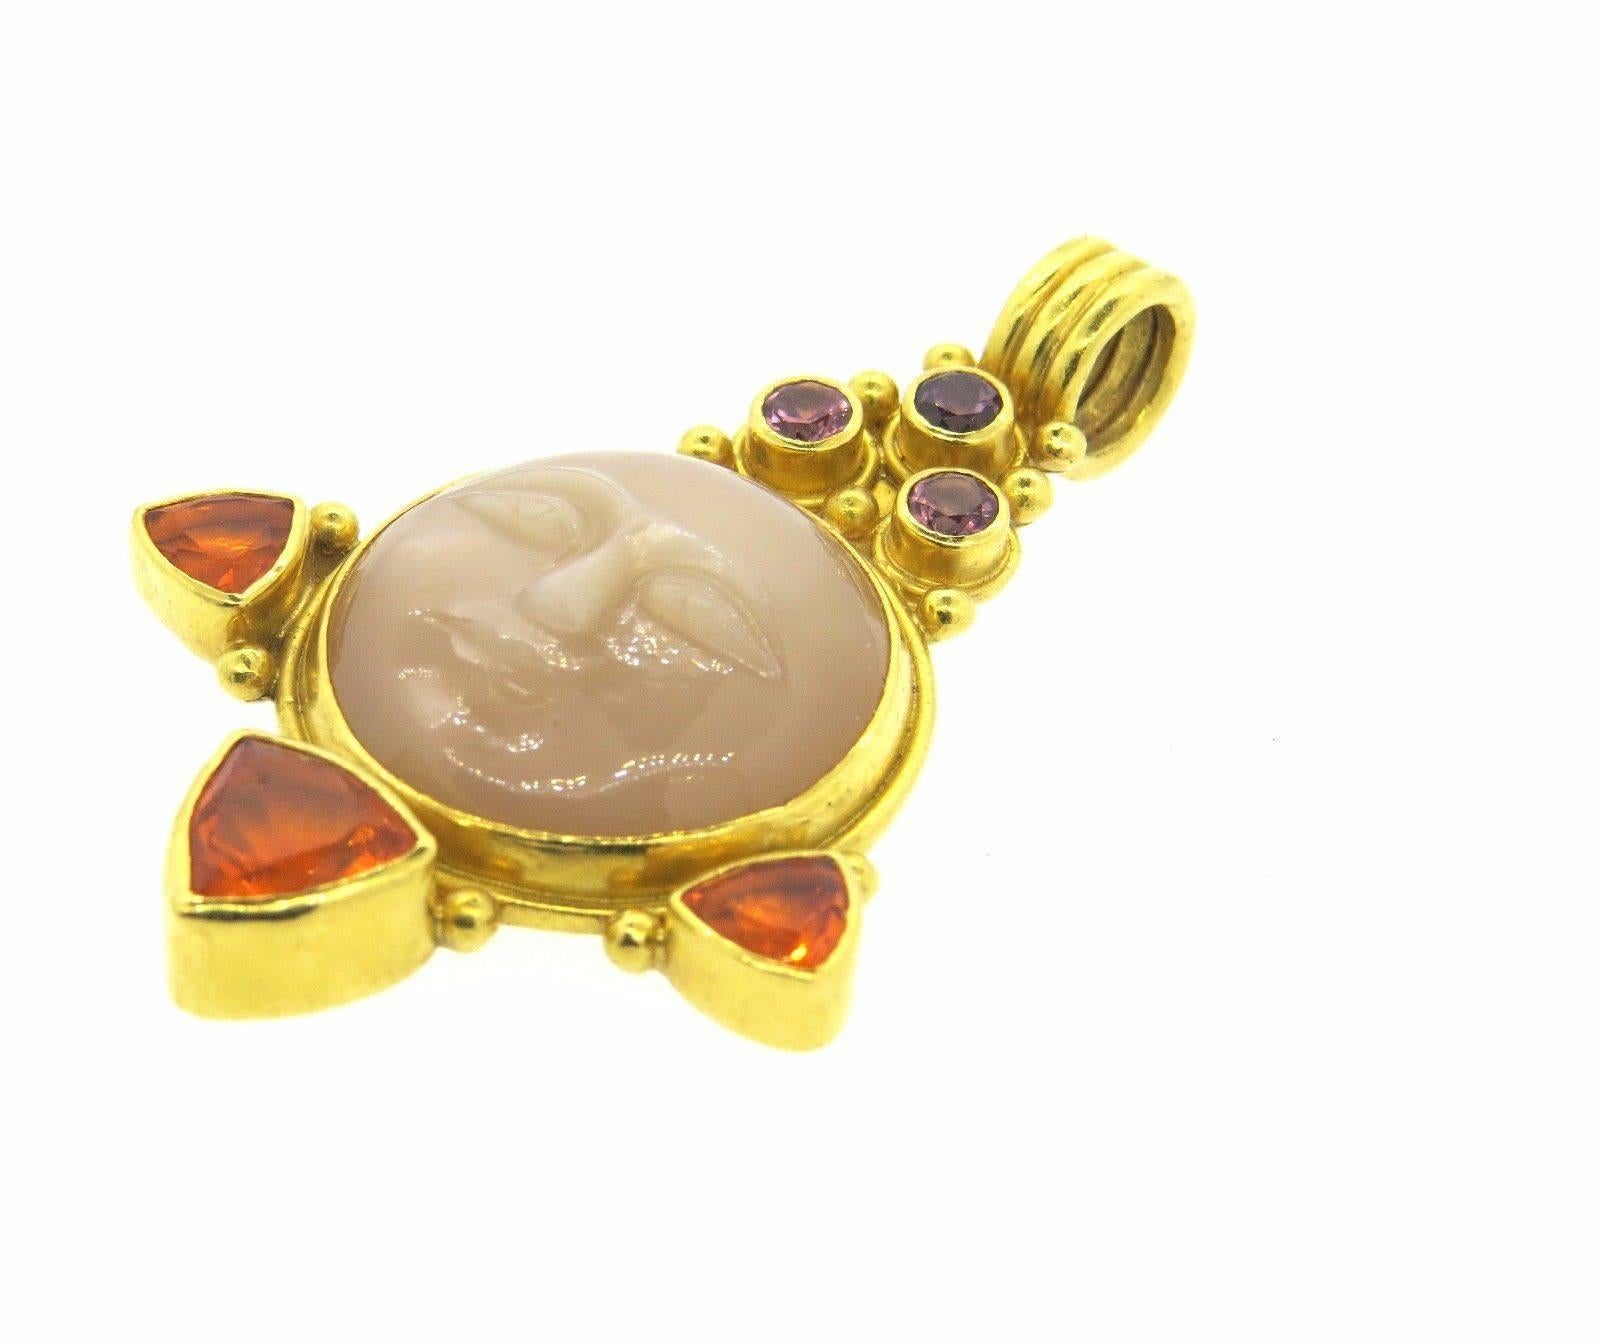 A 22k gold pendant set with multi color gemstones.  Crafted by Gloria Natale, the pendant measures 64mm (including bale) x 42mm.  Marked: Gloria Natale, 1998, 22k.  Weight 32.1 grams.